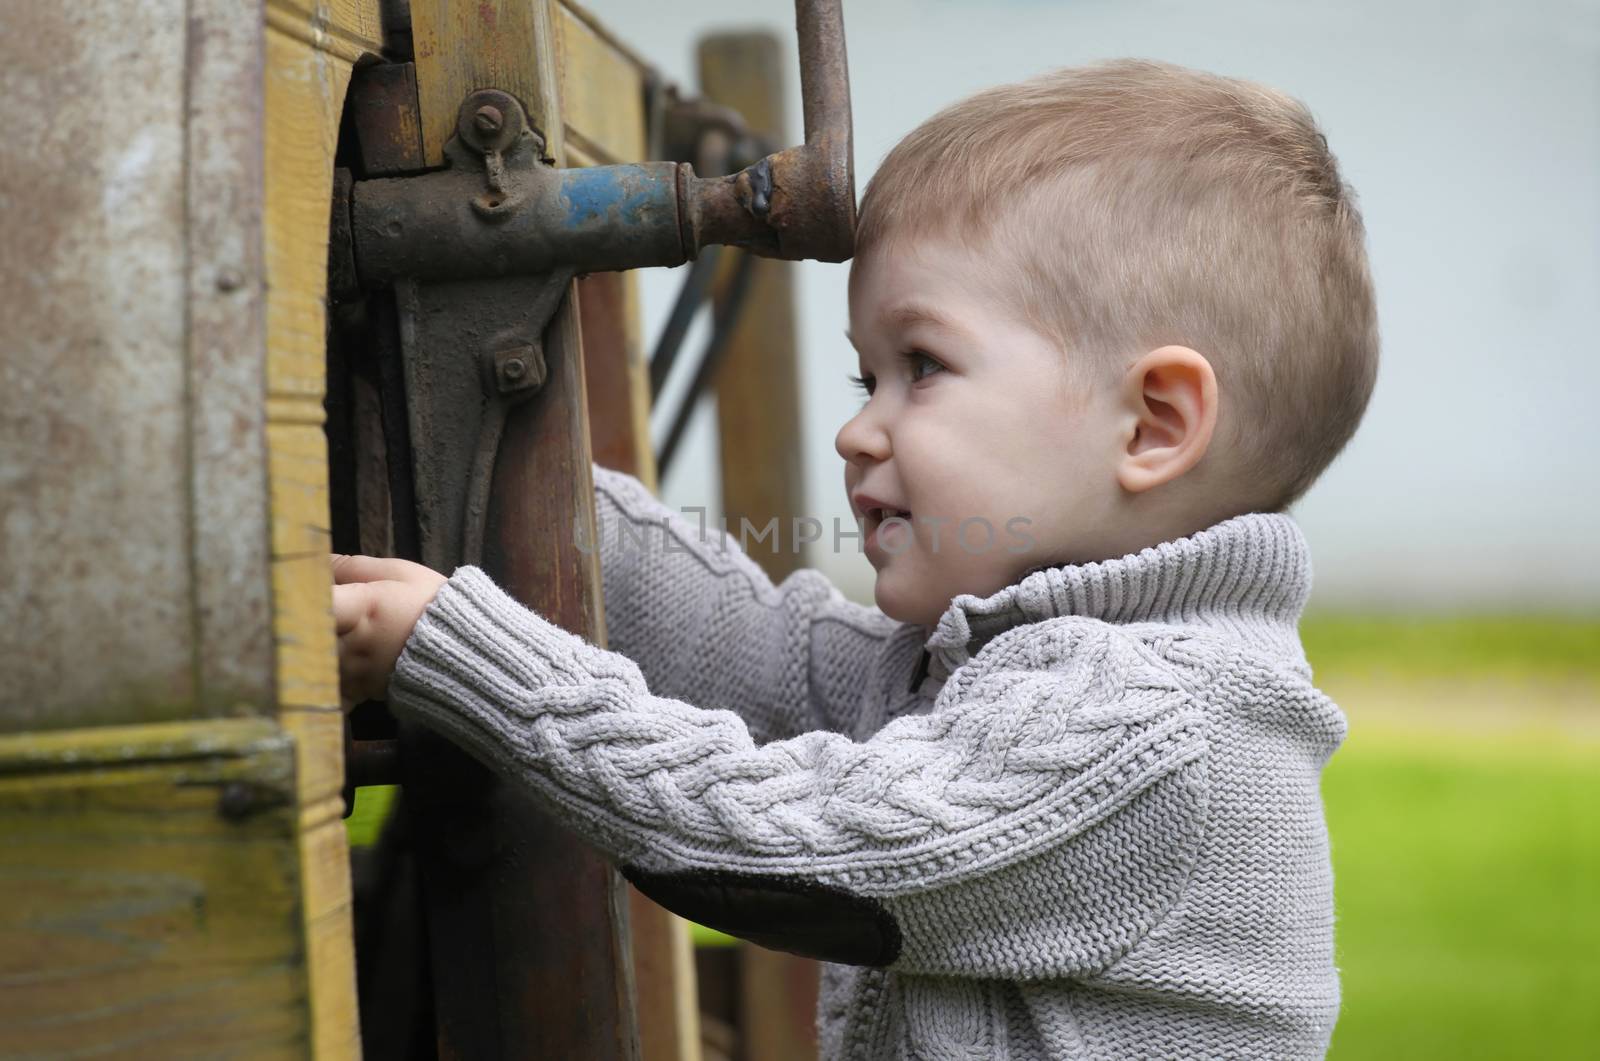 2 years old curious Baby boy managing with old agricultural Mach by vladacanon